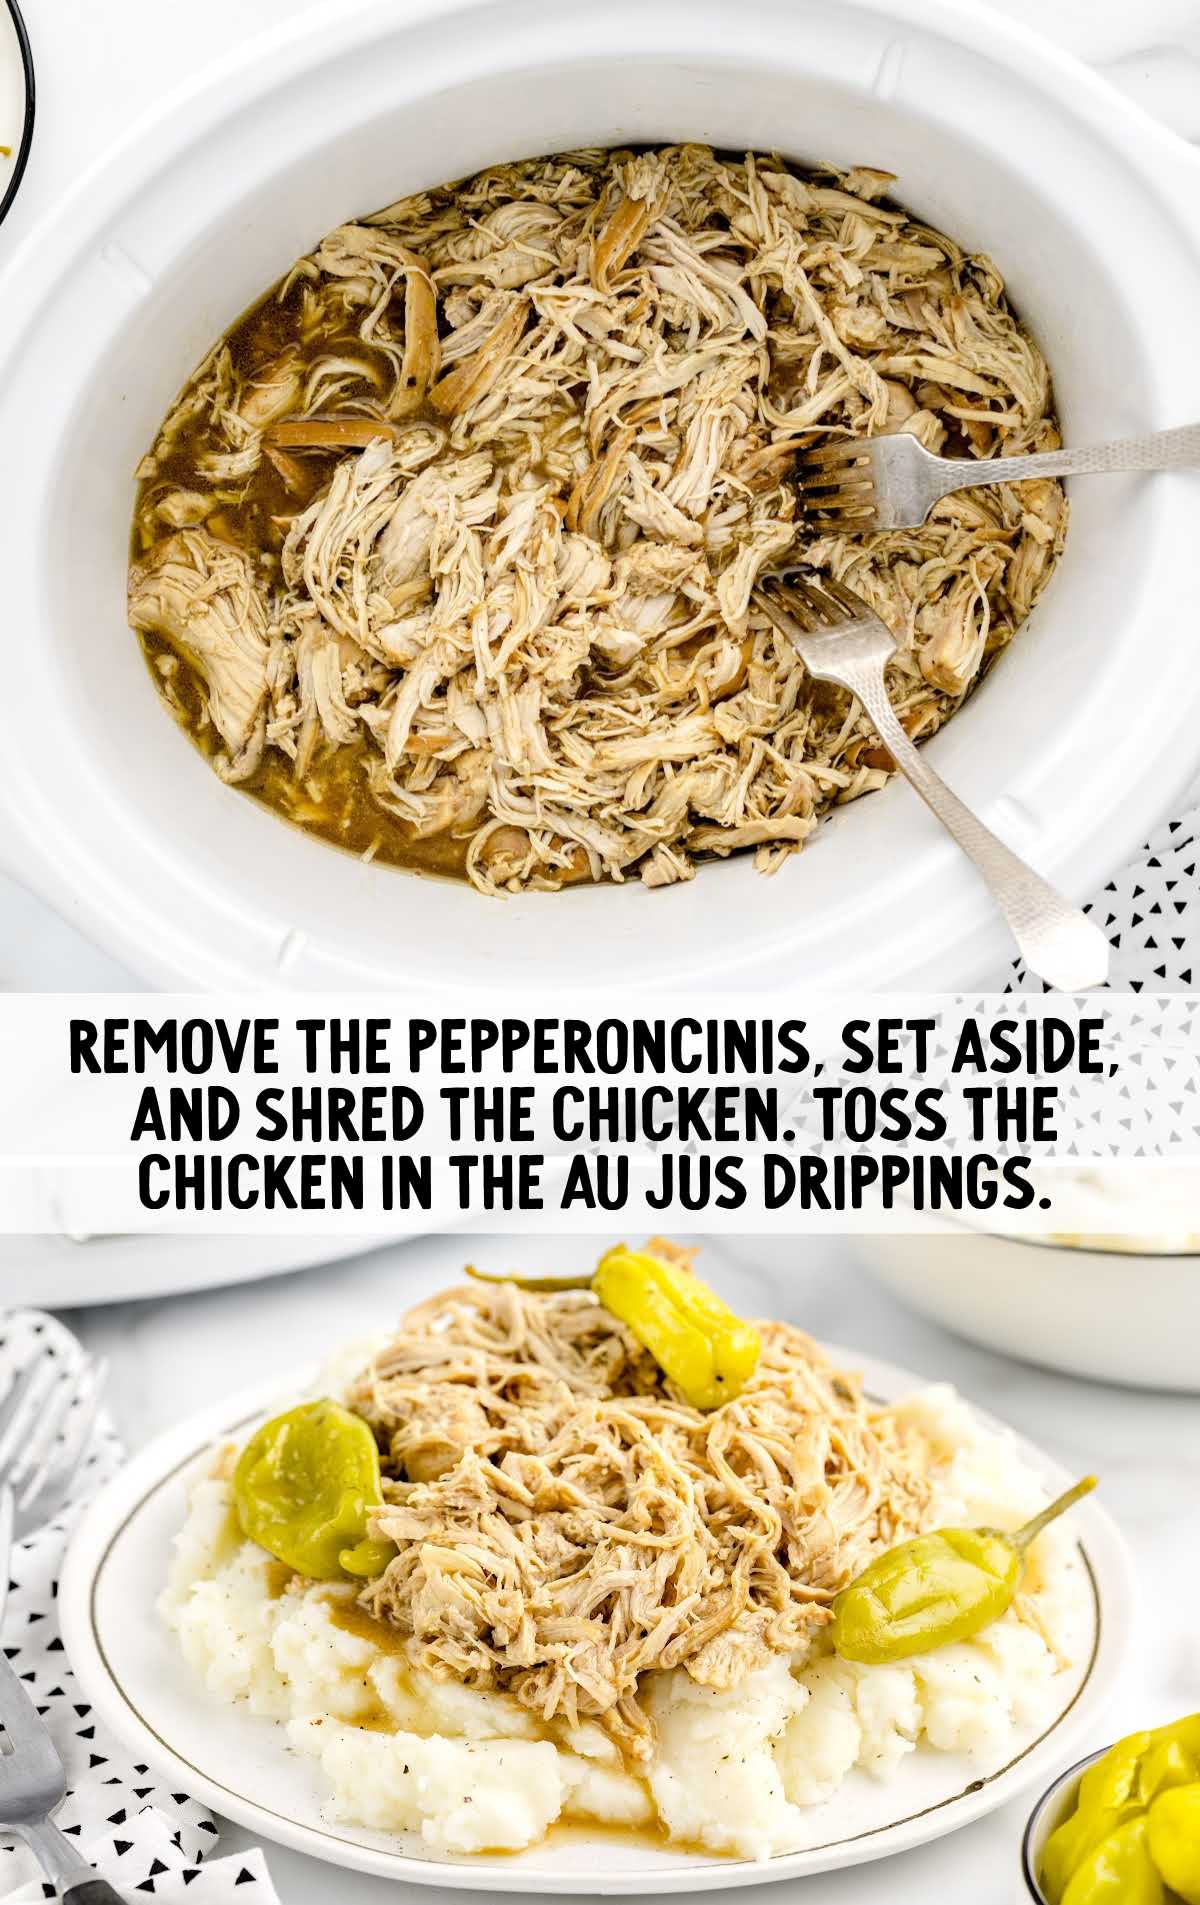 shredded chicken with pepperoncini in a crockpot and served over a plate of mashed potatoes